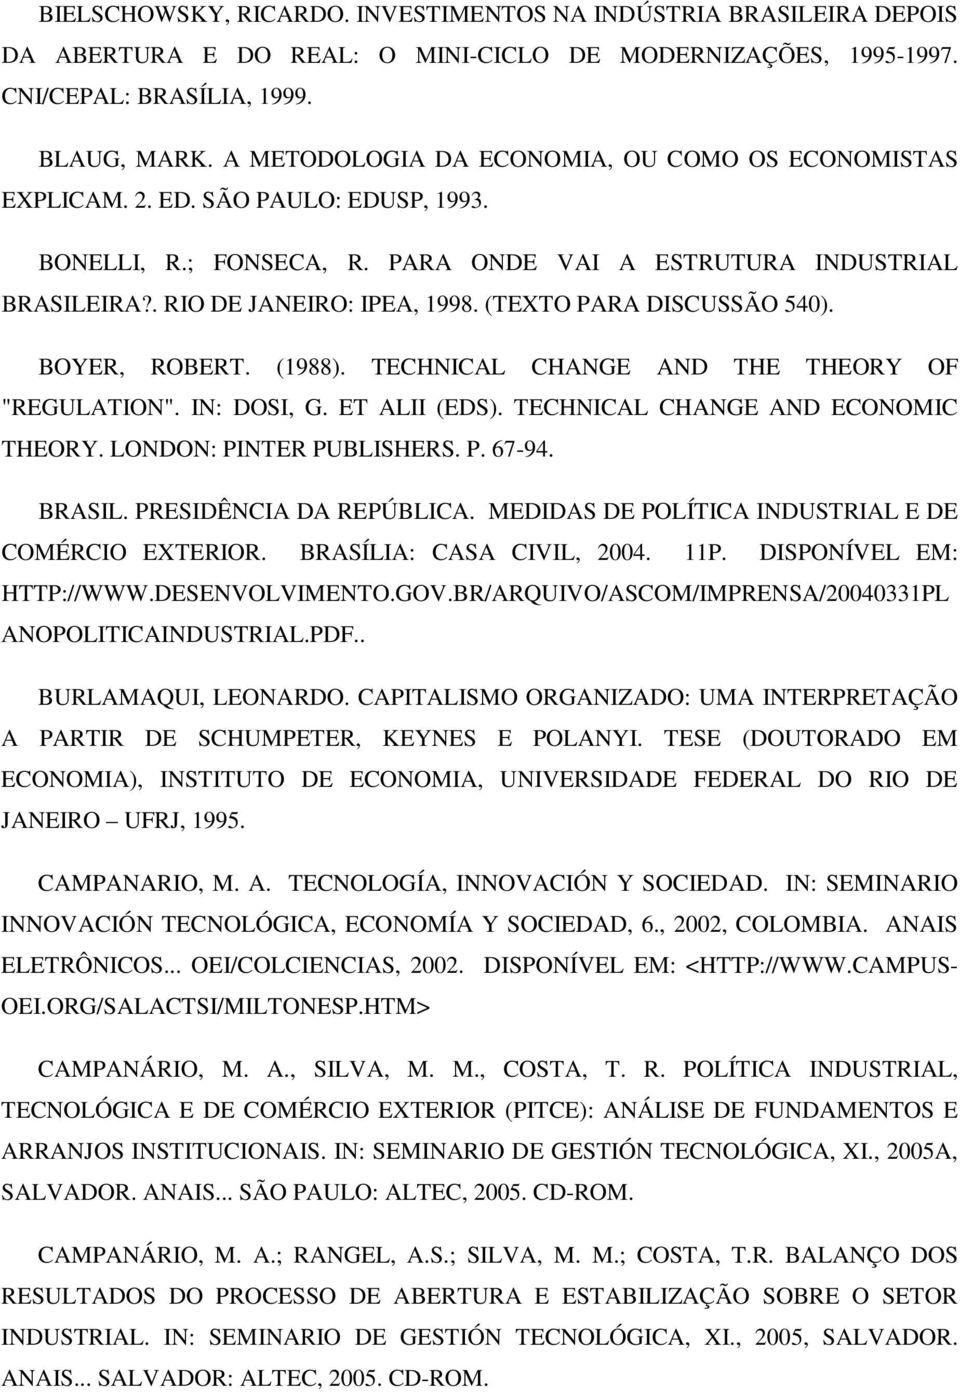 (TEXTO PARA DISCUSSÃO 540). BOYER, ROBERT. (1988). TECHNICAL CHANGE AND THE THEORY OF "REGULATION". IN: DOSI, G. ET ALII (EDS). TECHNICAL CHANGE AND ECONOMIC THEORY. LONDON: PINTER PUBLISHERS. P. 67-94.